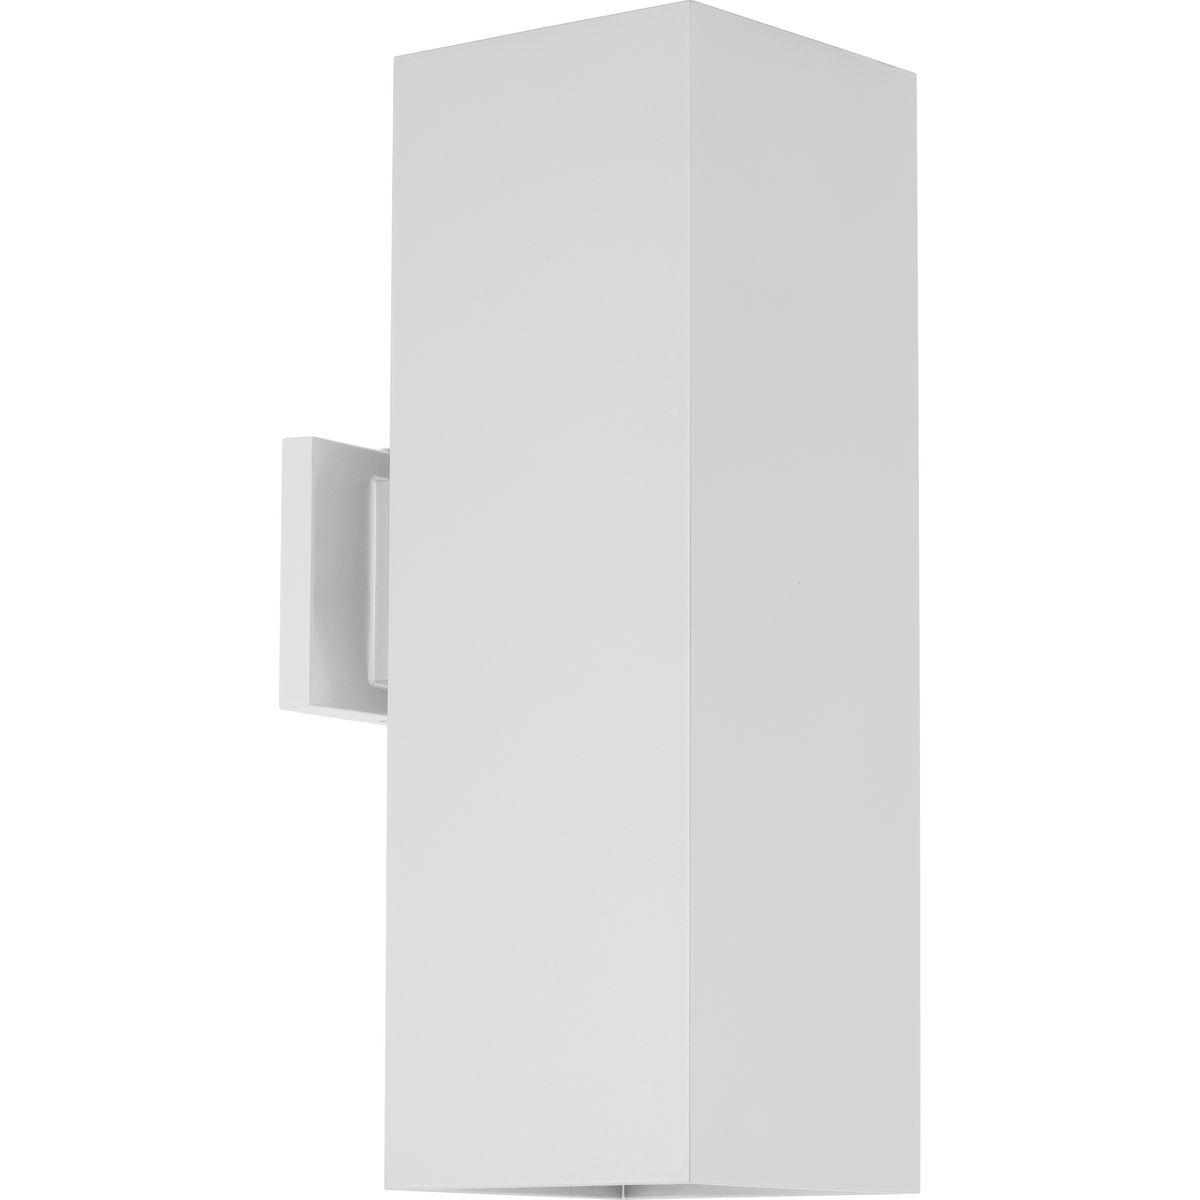 Hubbell P5644-30-30K 6" LED Square Cylinder with heavy-duty aluminum construction, die-cast aluminum wall bracket. UL listed for wet locations. Powder coat for chipping and fading resistance. White finish. Wet location listed when used with P860047 top cover lens (sold separa